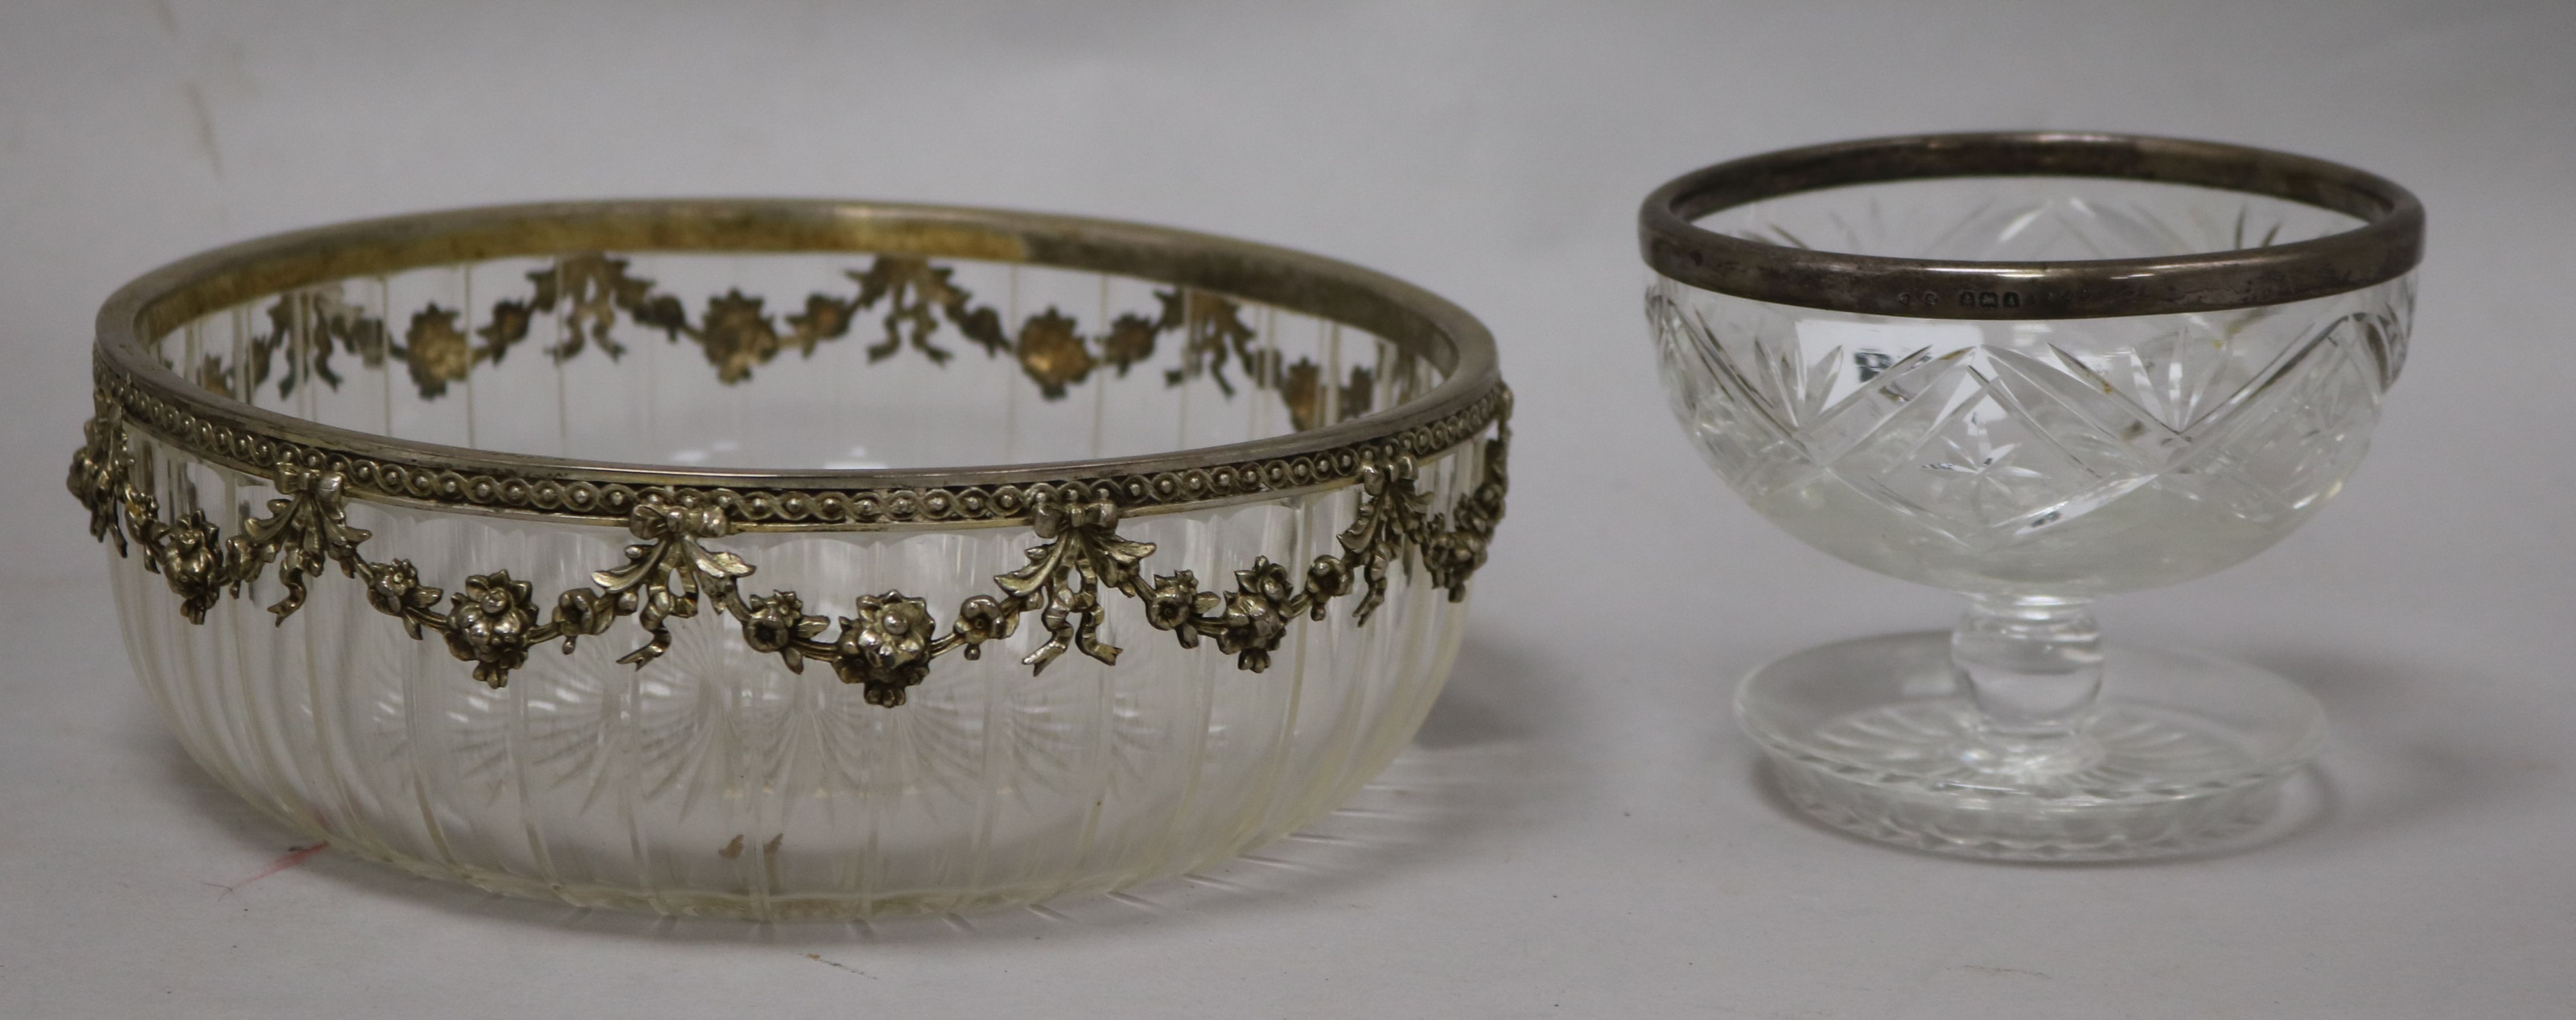 Two silver rimmed glass bowls Diam 21cm